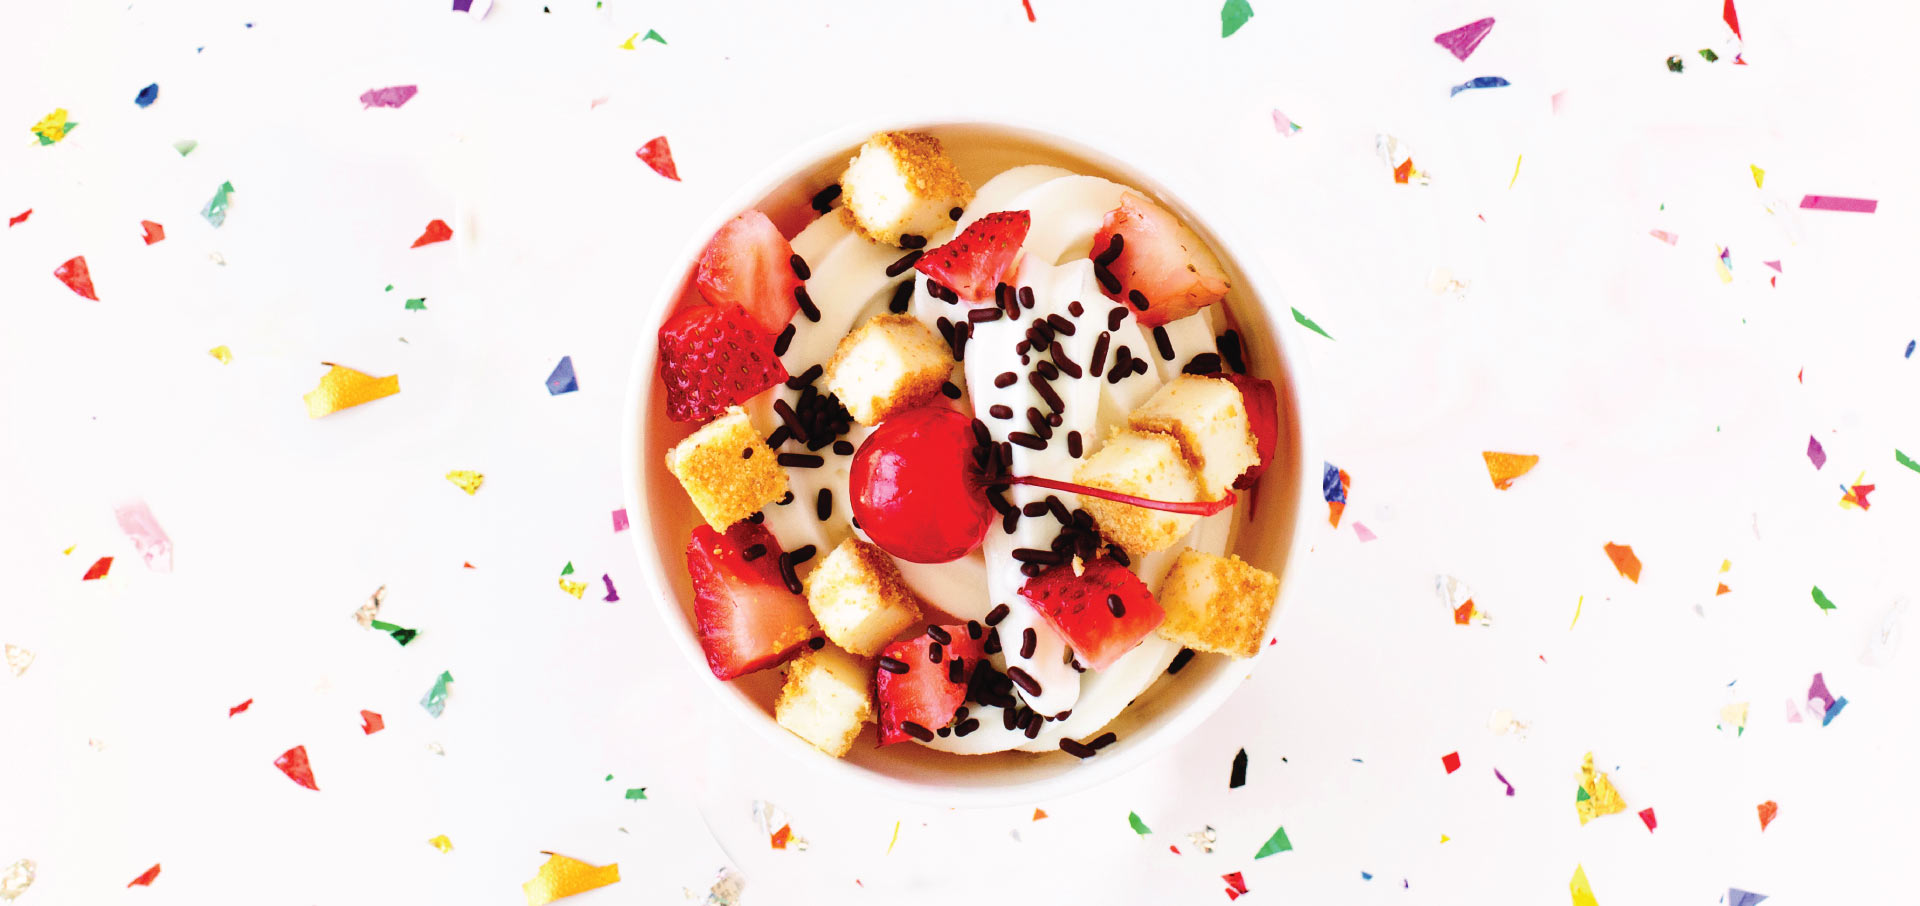 A bowl viewed from the top with fresh fruit, frozen yogurt, and chocolate sprinkles and a background of confetti on white